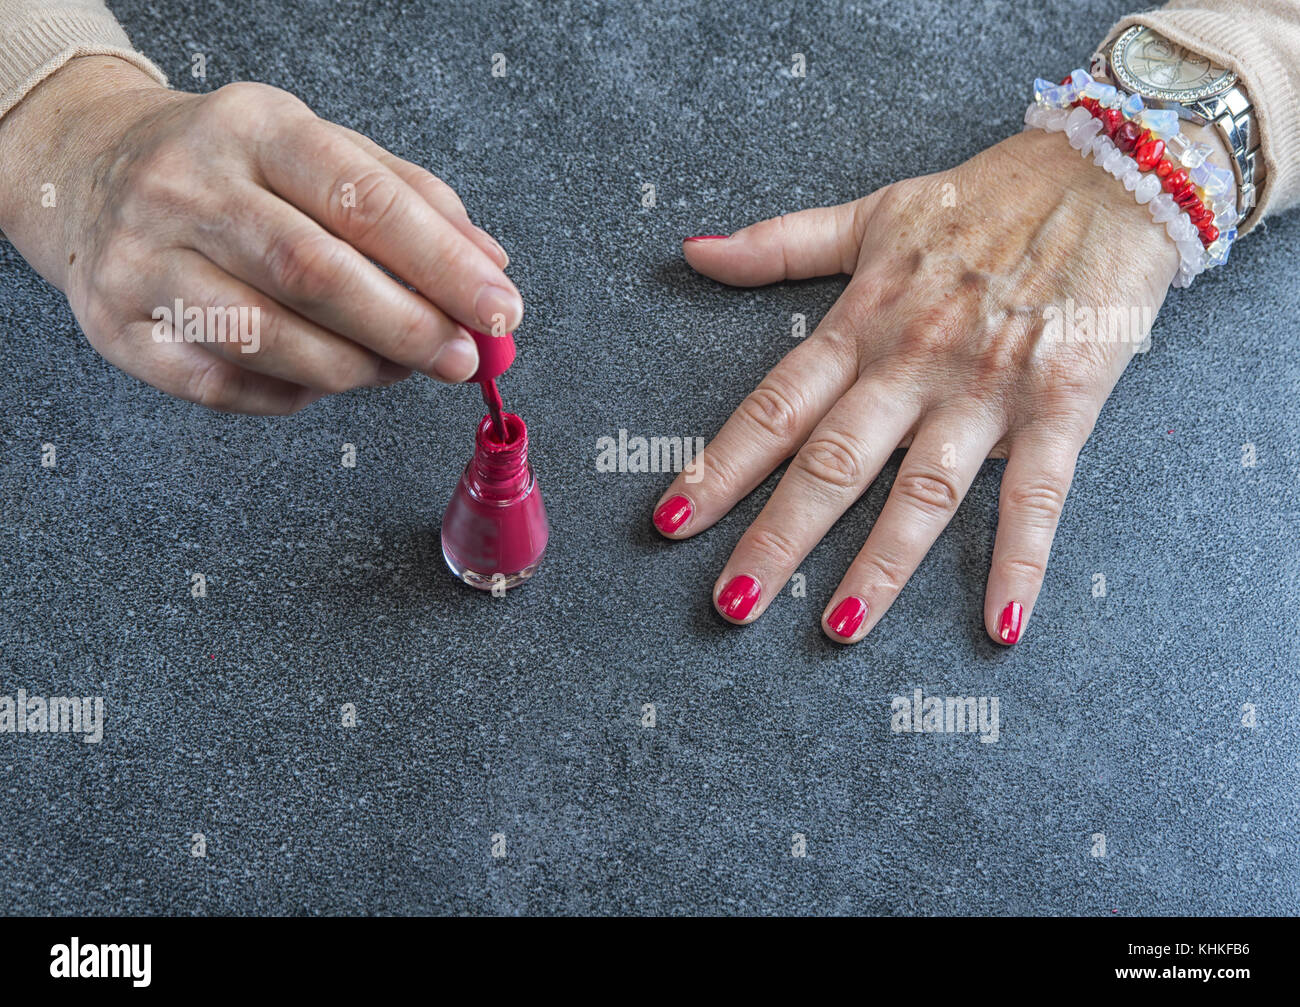 Manicure. Old Woman Hands Polishing Nails With Red Nail Polish In Beauty  Salon Stock Photo - Alamy